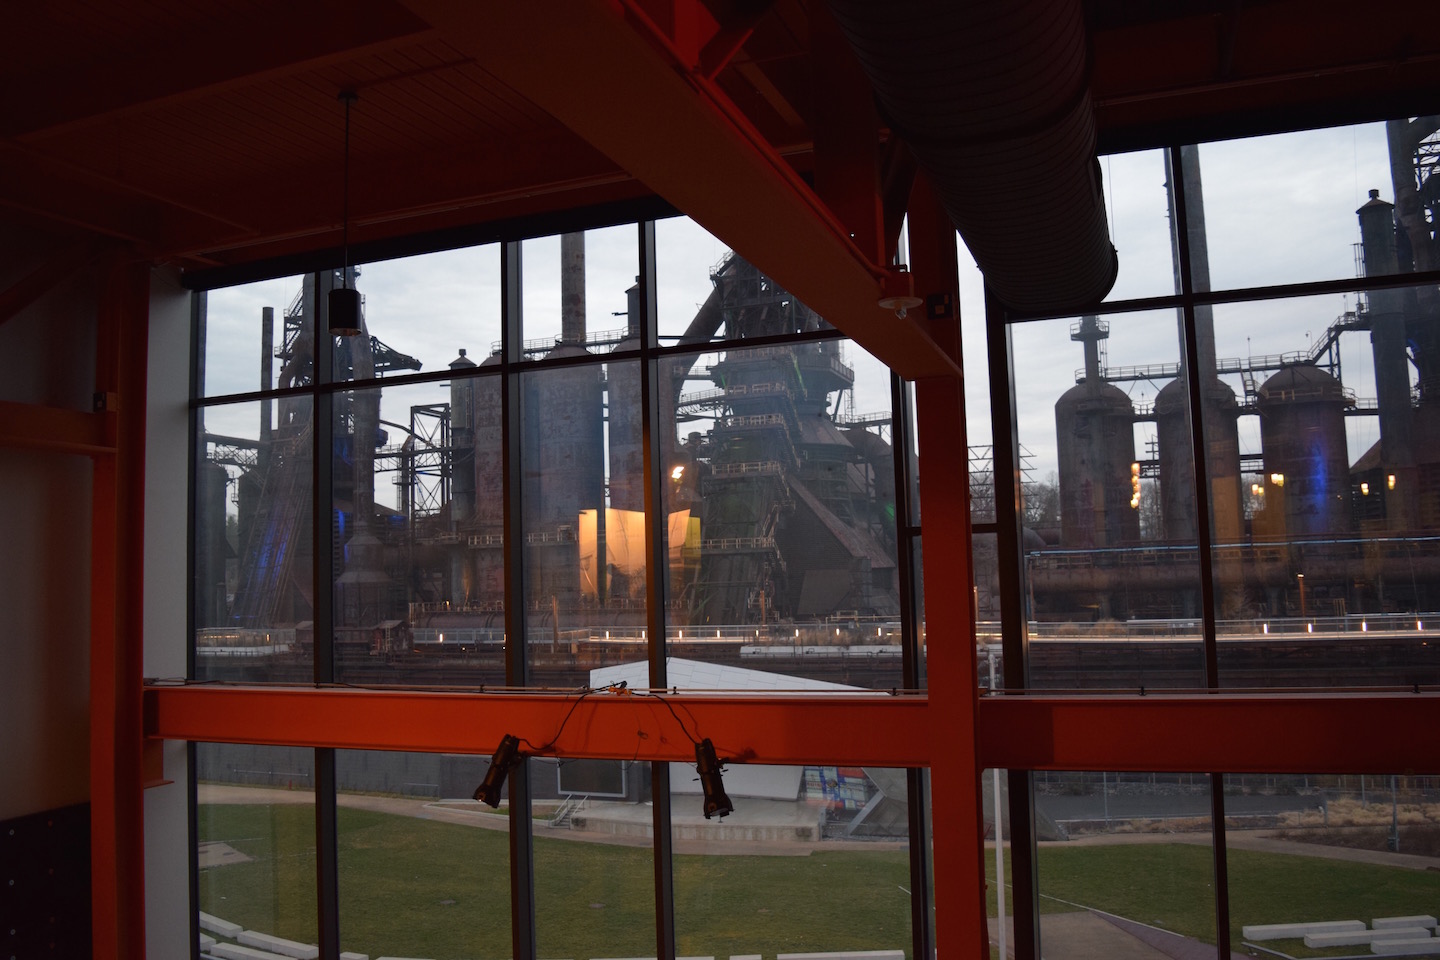 Check out the SteelStacks!